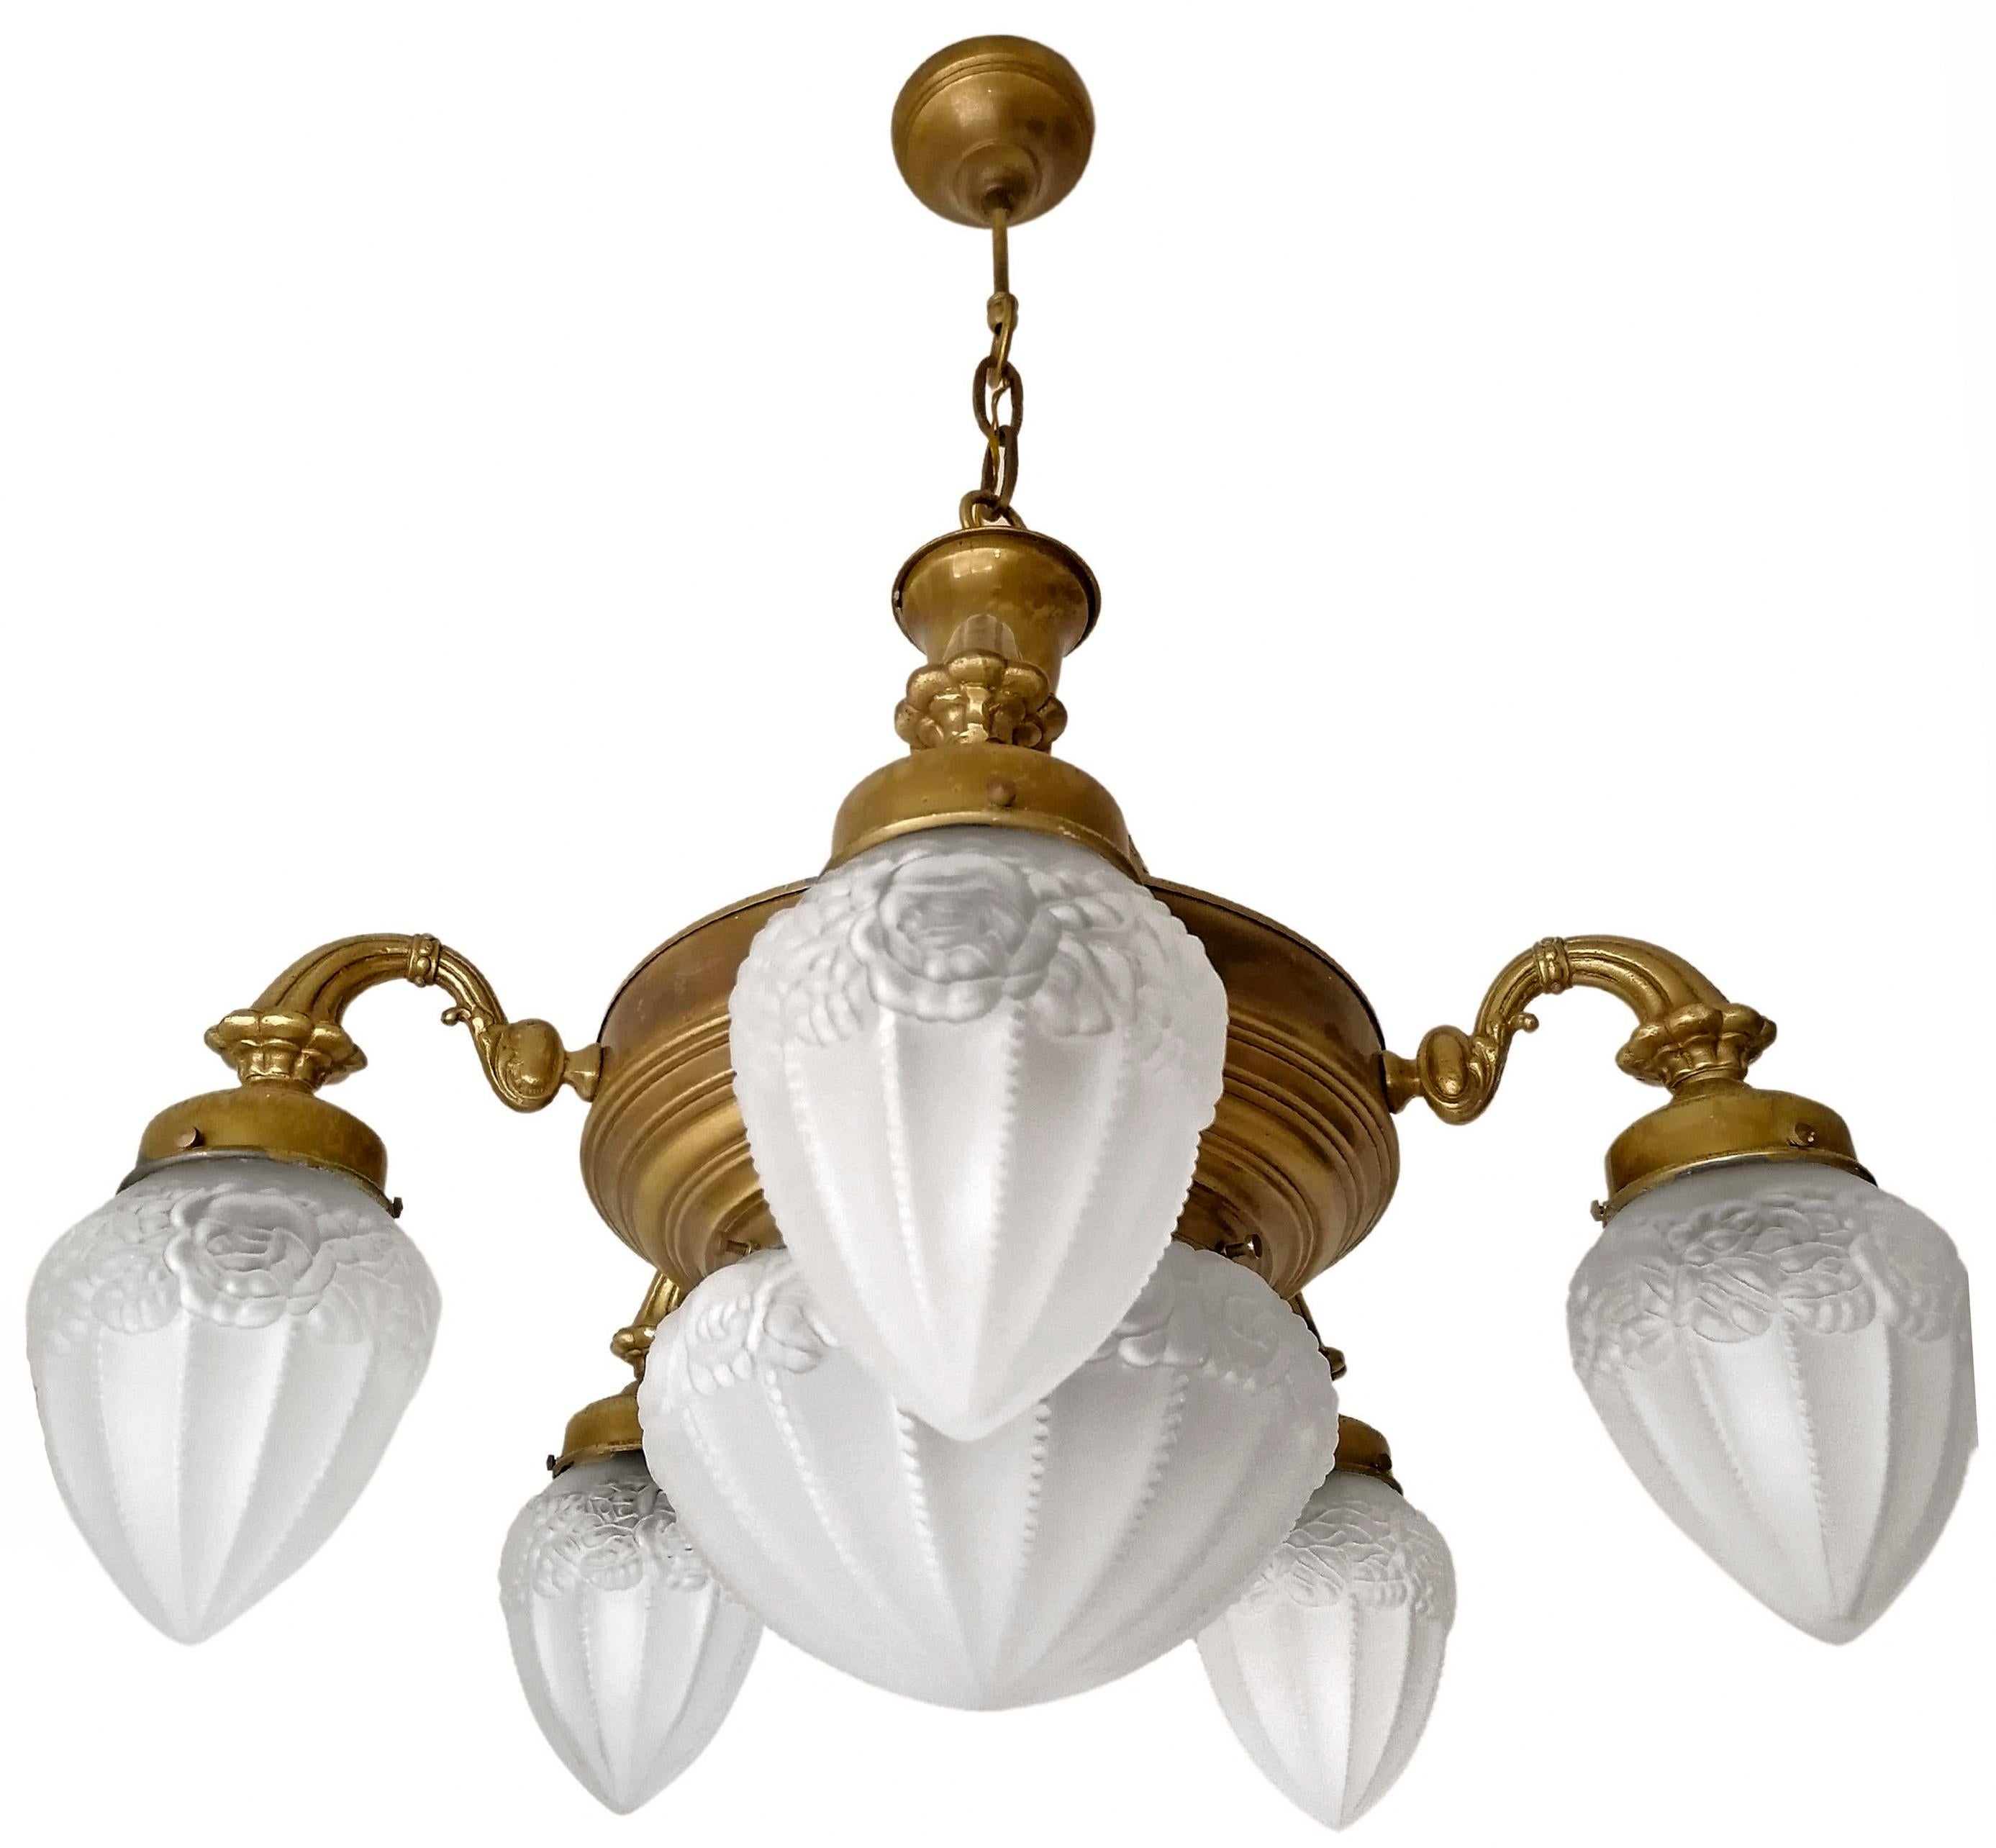 Gorgeous large French Art Deco and Art Nouveau in frosted glass chandelier. Engraved gilt brass and ornate arms. Age patina

Dimensions
Height: 39.38 in. chain - 4.72 in (100 cm chain-12 cm)
Diameter: 28.35 in. (72 cm)

6 light bulb (5-E14 + 1